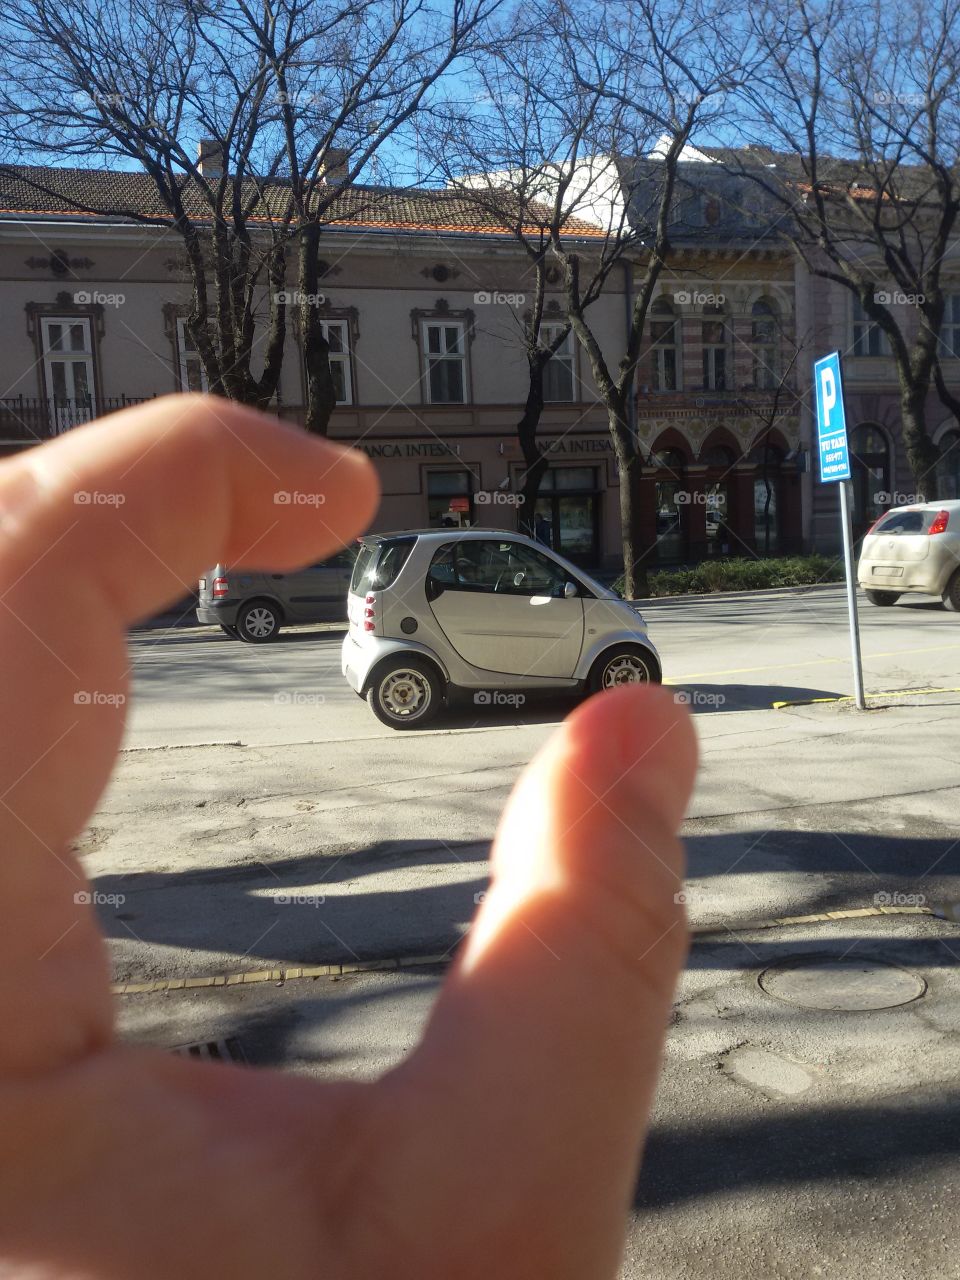 smart car in the hand